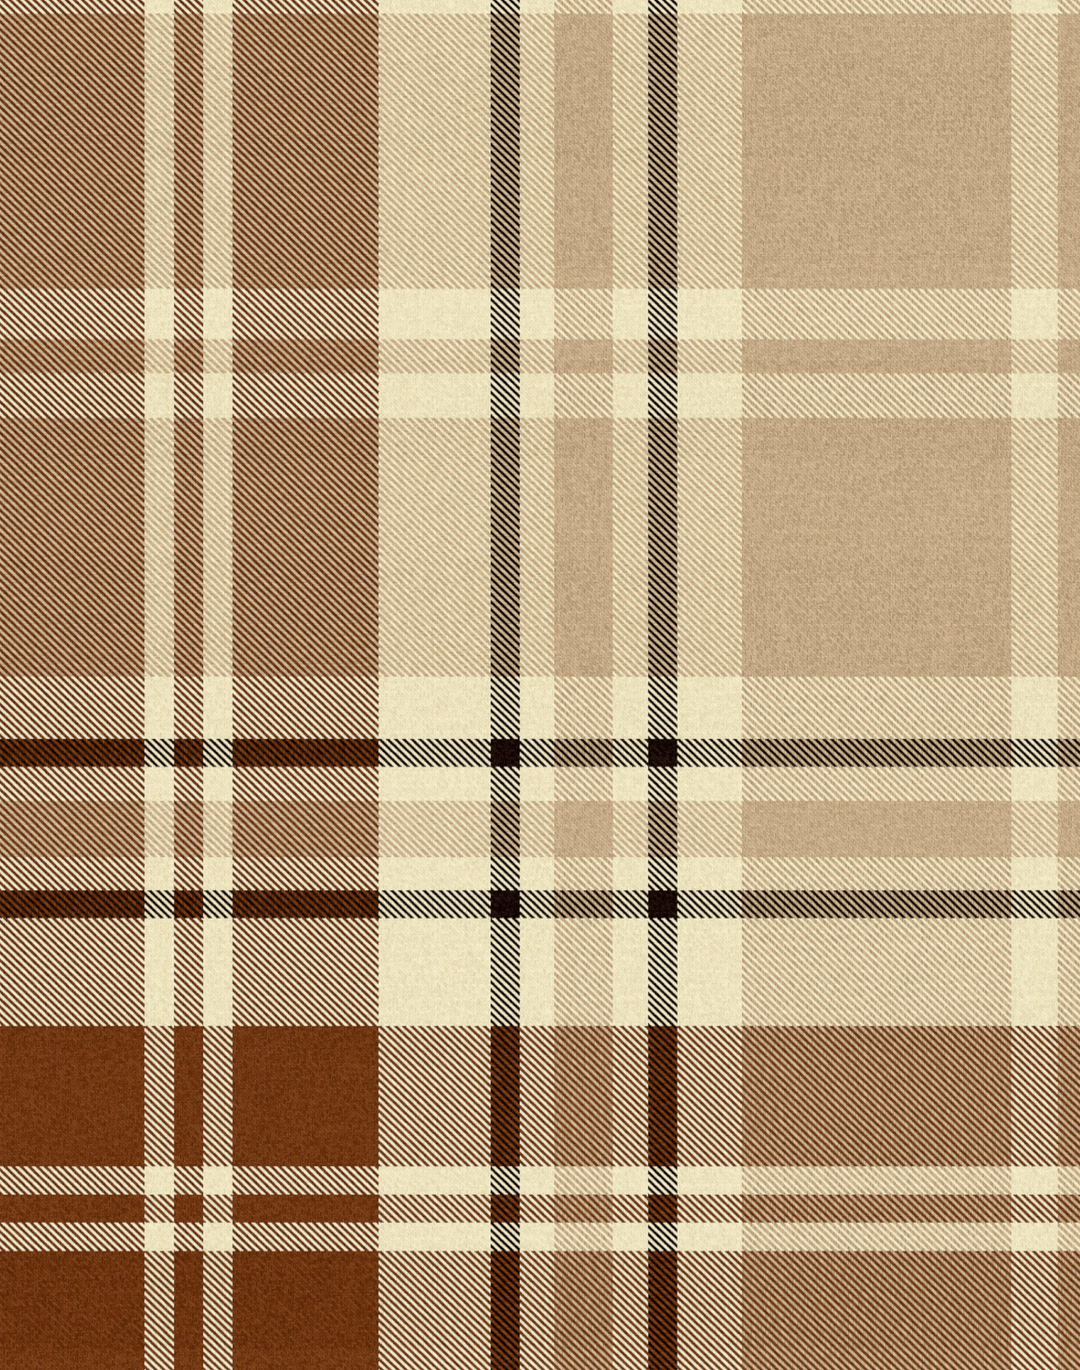 Chesterfield Plaid, The Collective Pattern – Cappuccino